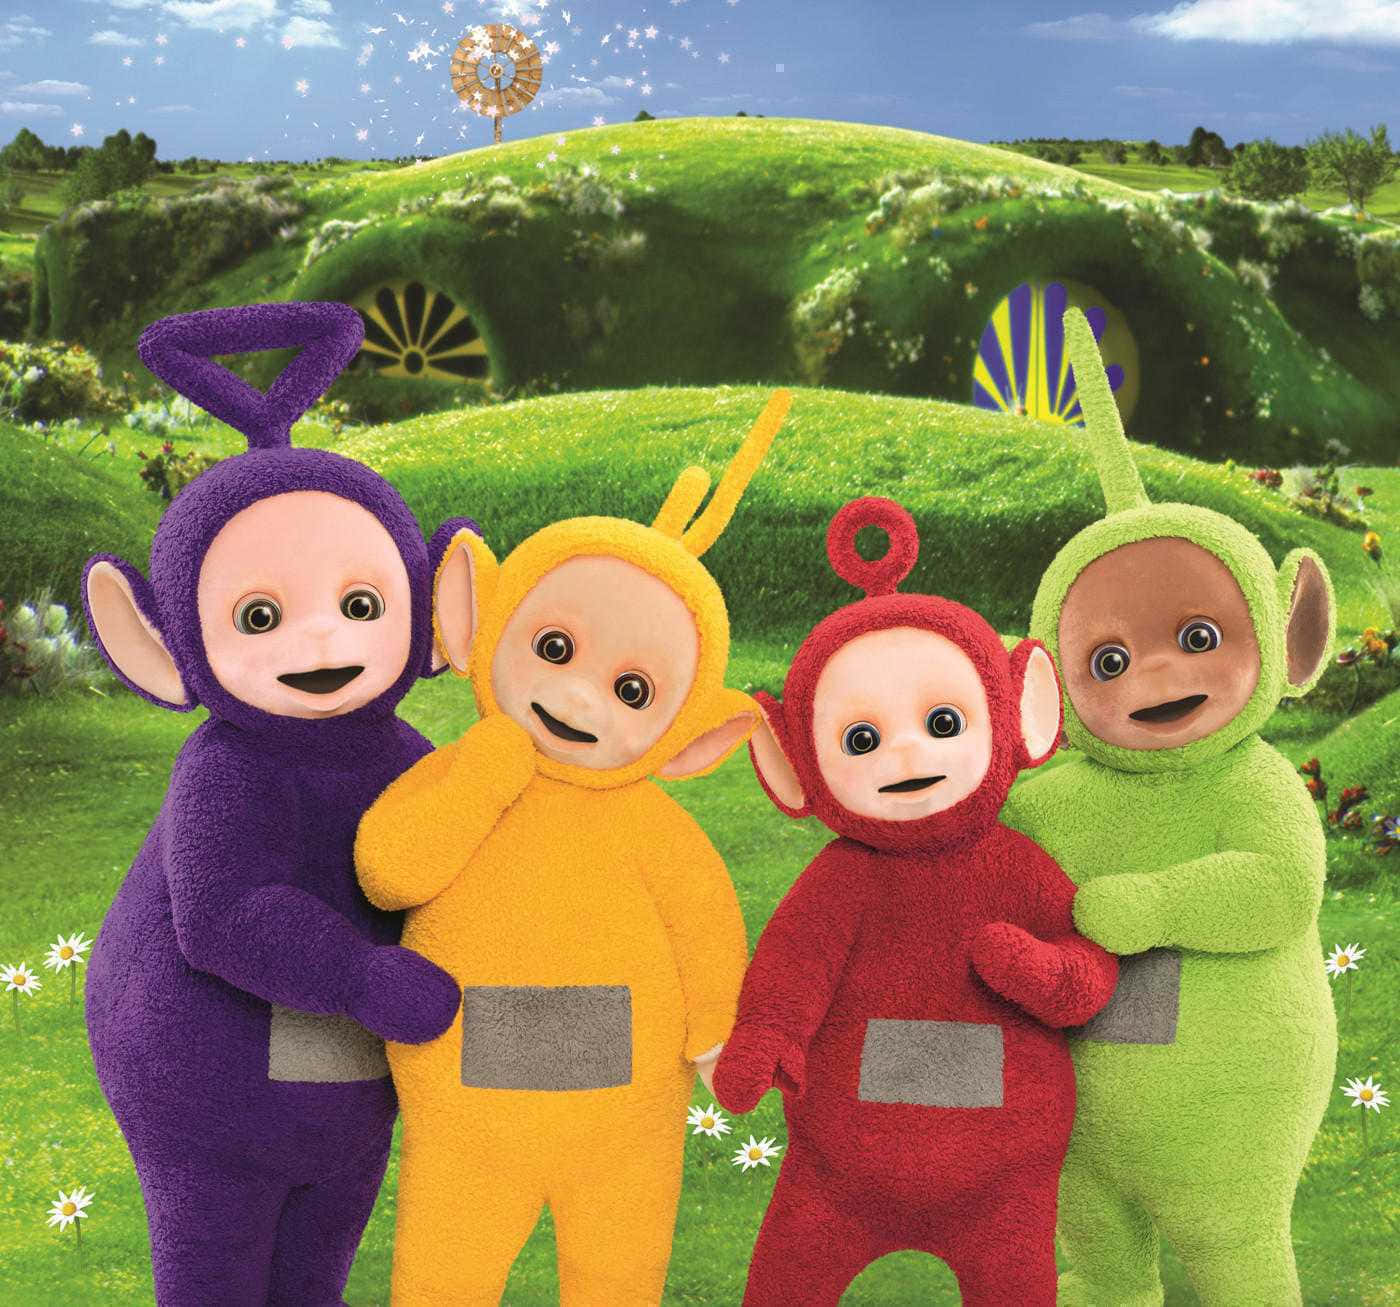 Playtime with the Teletubbies!